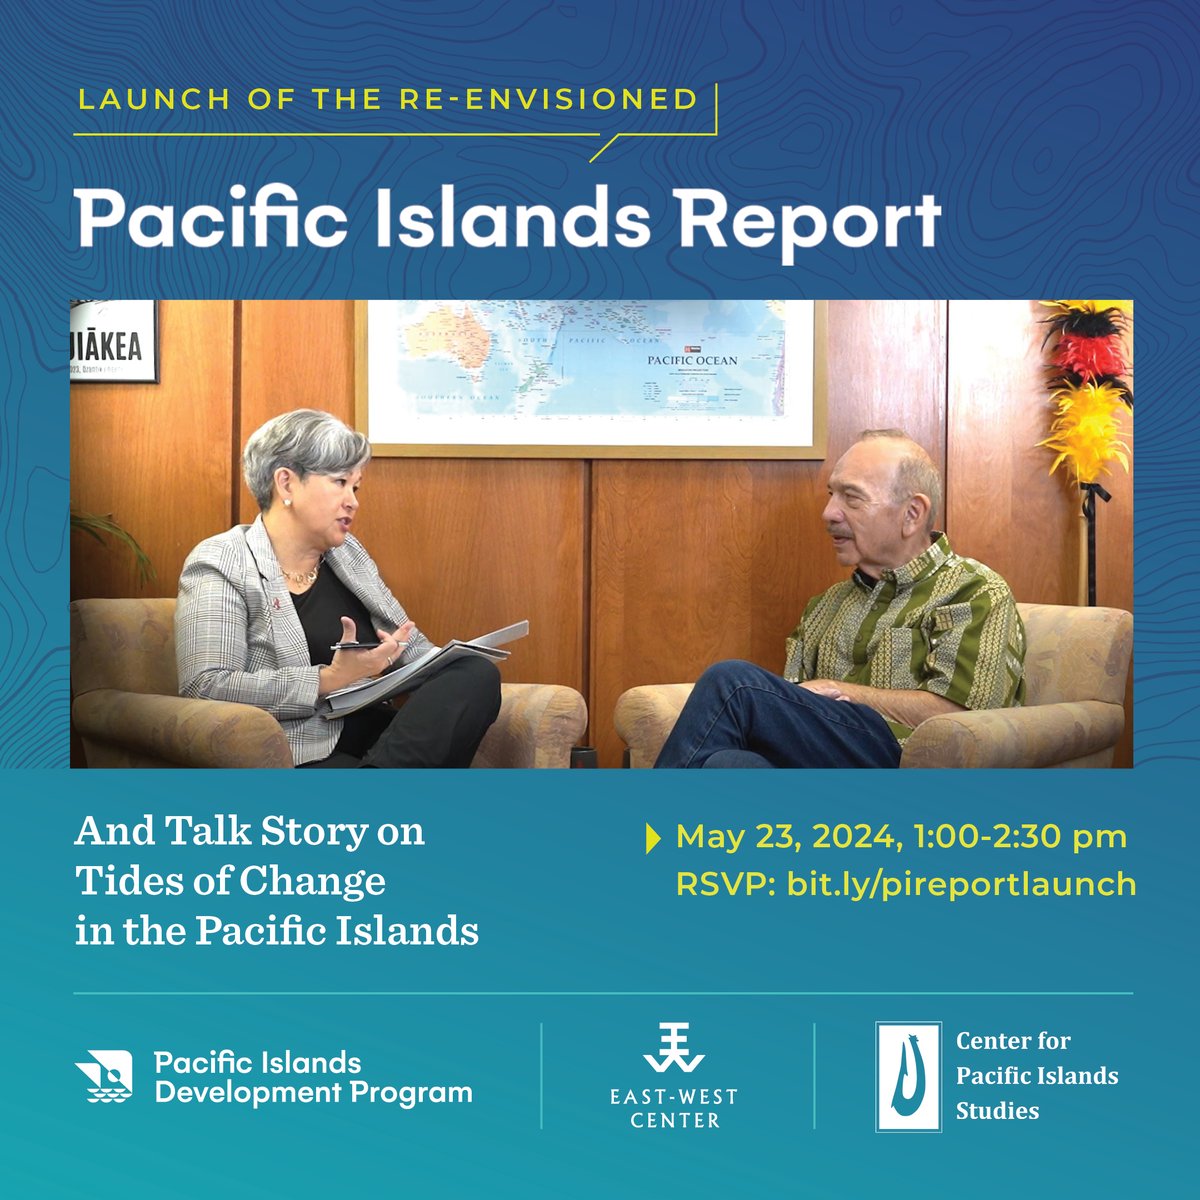 Join our Pacific Islands Development Program at the official launch of the re-envisioned Pacific Islands Report website, May 23, 1:00-2:30 p.m. HST on Zoom. RSVP: eastwestcenter.org/events/launch-… #SaveTheDate #PIReport #VisionsAndVoices